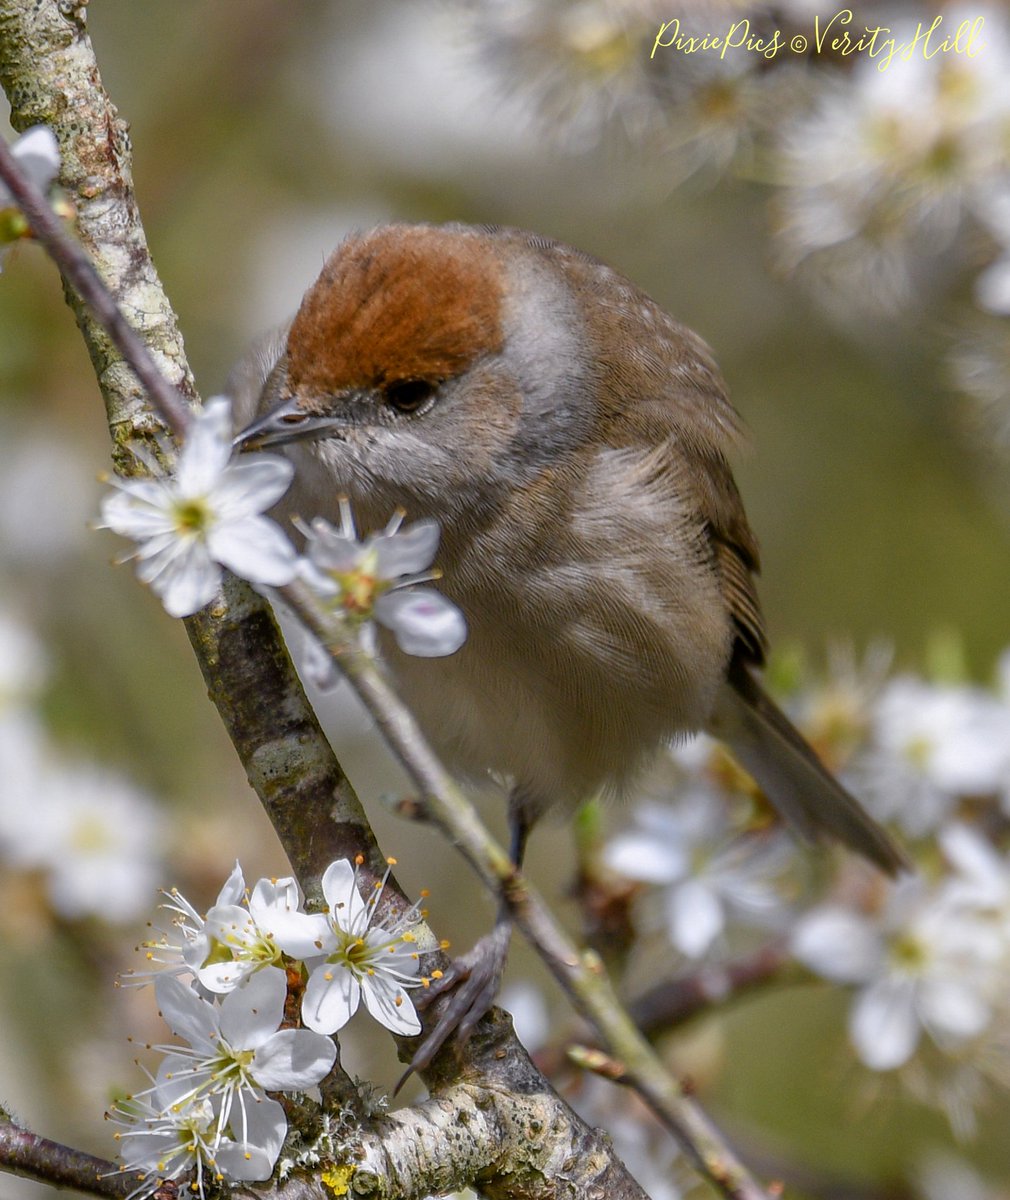 What a beautiful sunny day full of bird song everywhere 🎶🧡🐦 So soul soothing. This Female Blackcap was busy in the blossom catching insects 🌸 such a beauty 😍 #blackcap #SylviaAtricapilla #birds #birdlover #birdphotography #springtime #spring #bbcspringwatch #bbcWildlifePOTD